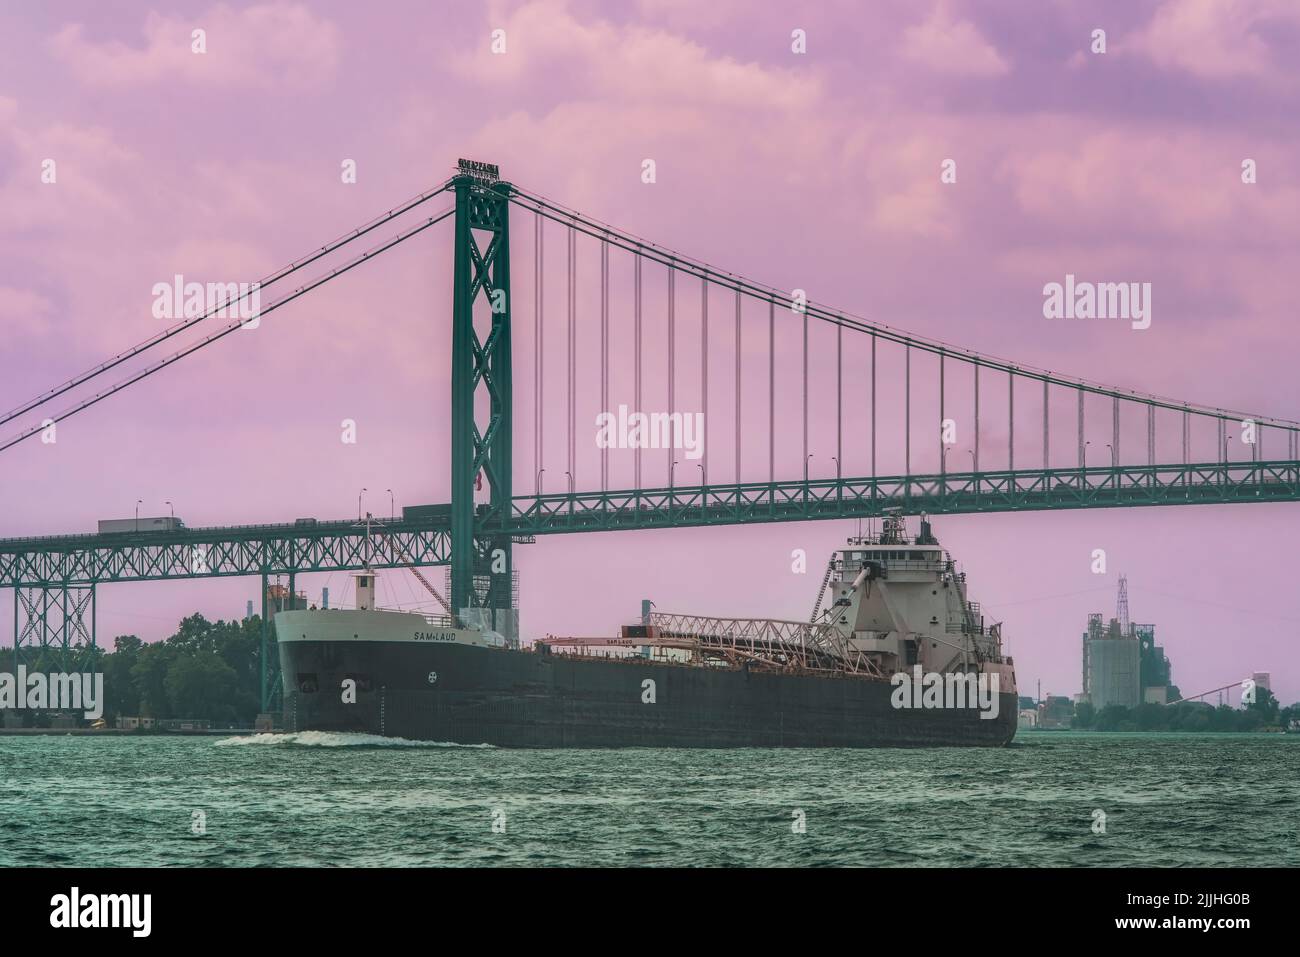 Great Lakes freighter MV Sam Laud, owned and operated by the American Steamship Company, under Ambassador Bridge, Detroit River, Michigan USA Stock Photo